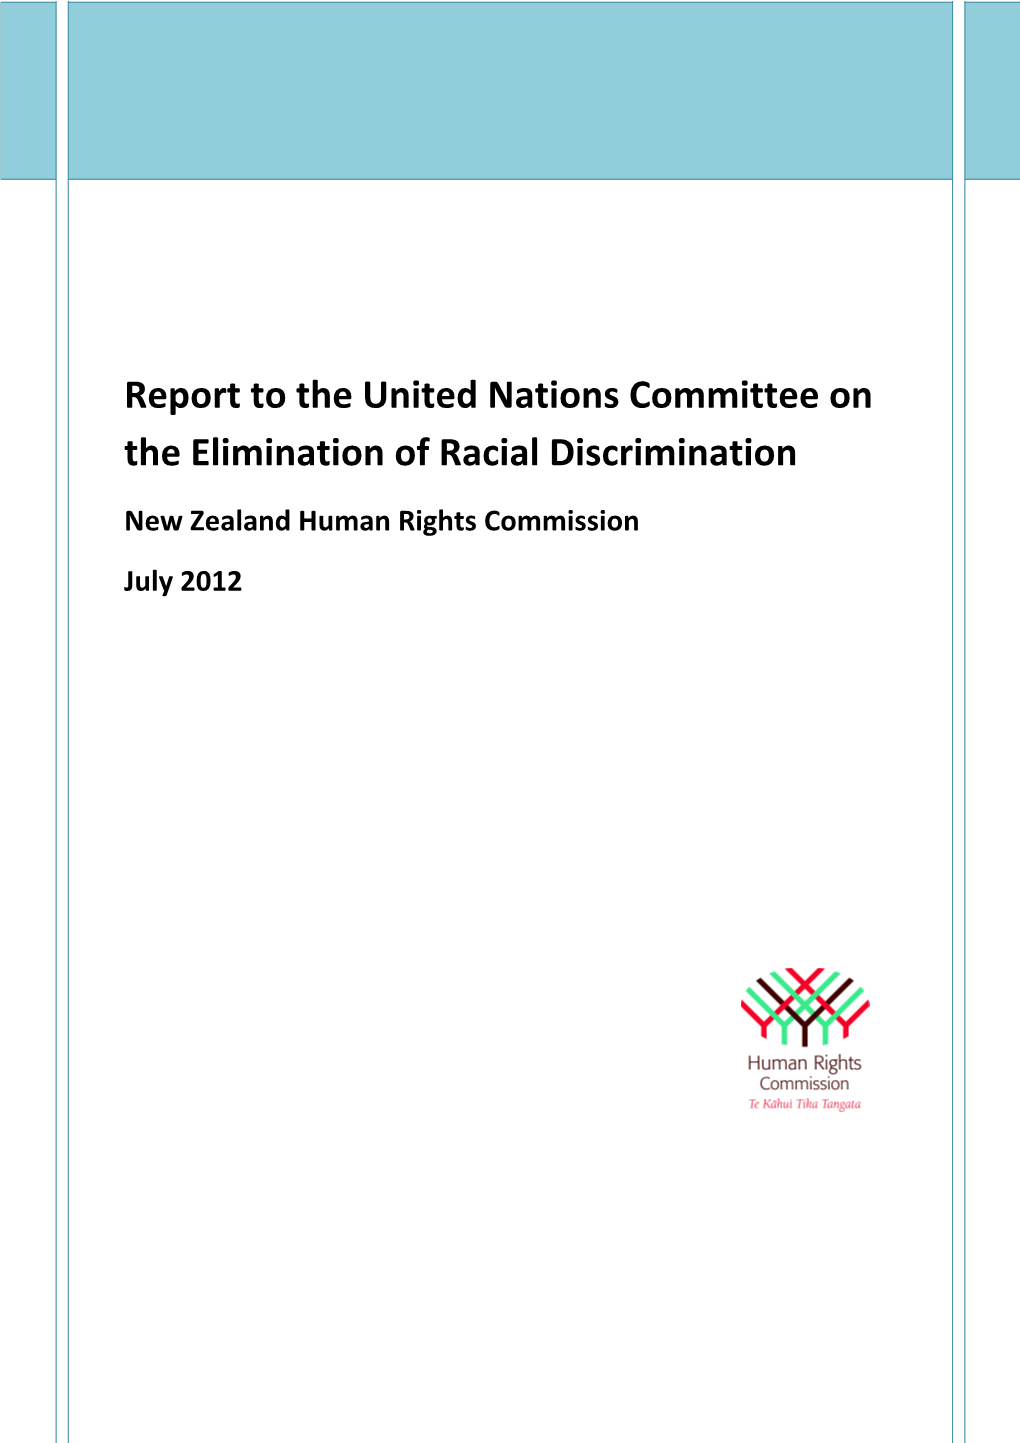 NZHRC Report to CERD July 2012